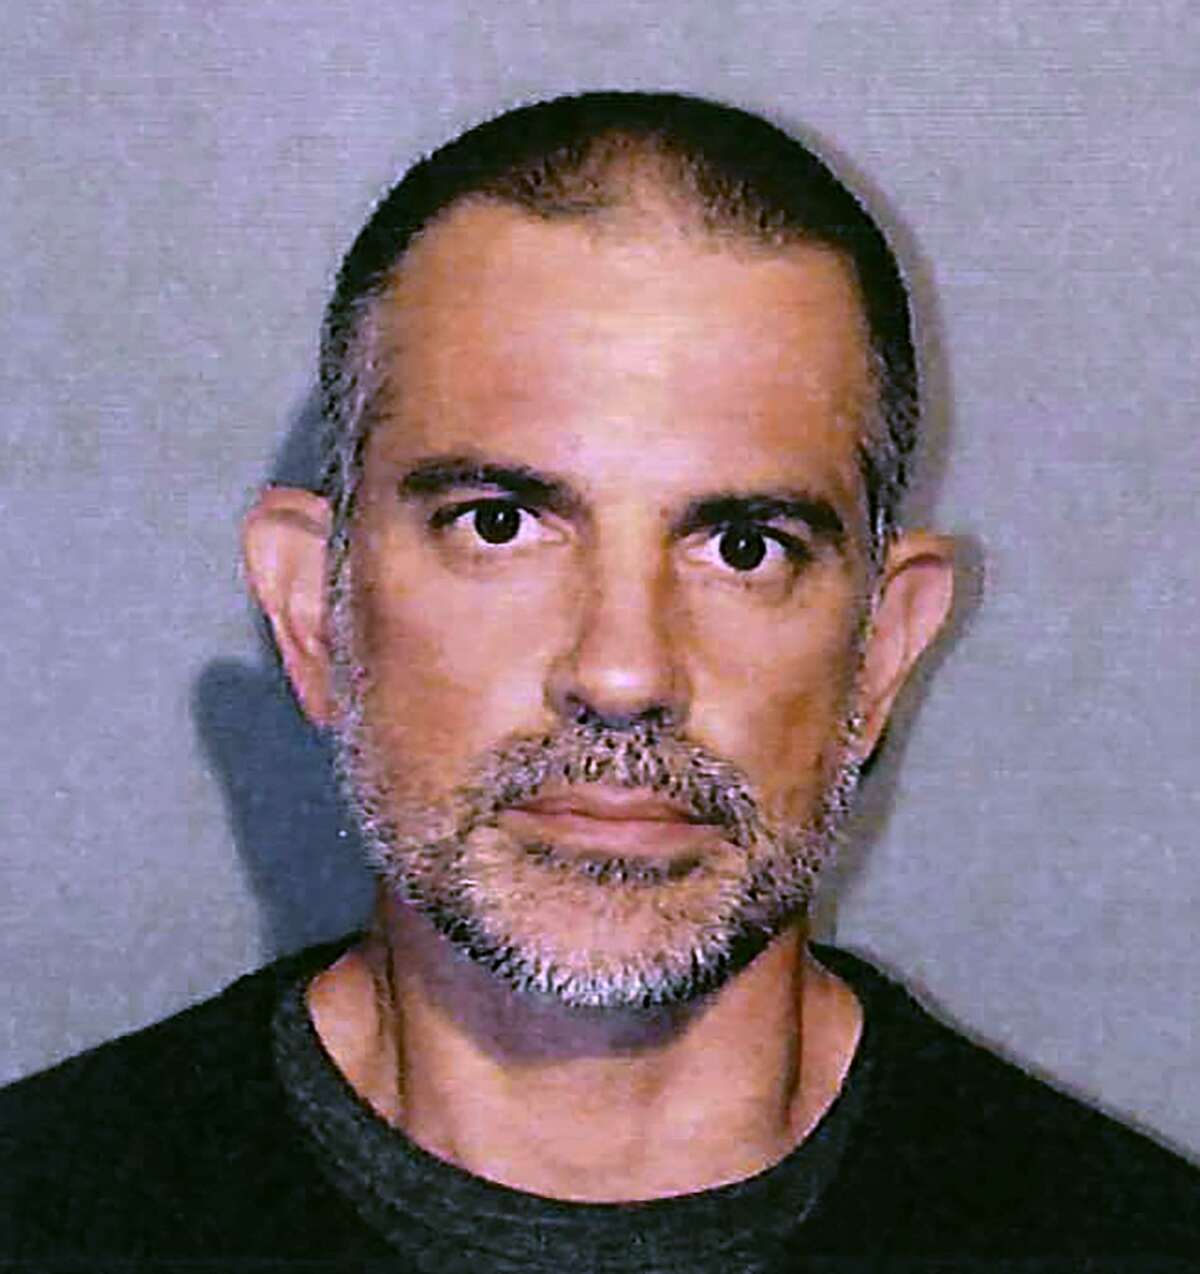 This photo provided by the New Canaan Police Department shows Fotis Dulos. Police in Connecticut have arrested a missing mother of five's estranged husband and his girlfriend on charges of evidence tampering and hindering prosecution. New Canaan authorities announced Sunday, June 2, 2019, the arrests of 51-year-old Dulos and 44-year-old Michelle C. Troconis. Both were detained on $500,000 bail and are scheduled to be arraigned Monday in Norwalk Superior Court. Details of the allegations were not released. (New Canaan Police Department via AP)